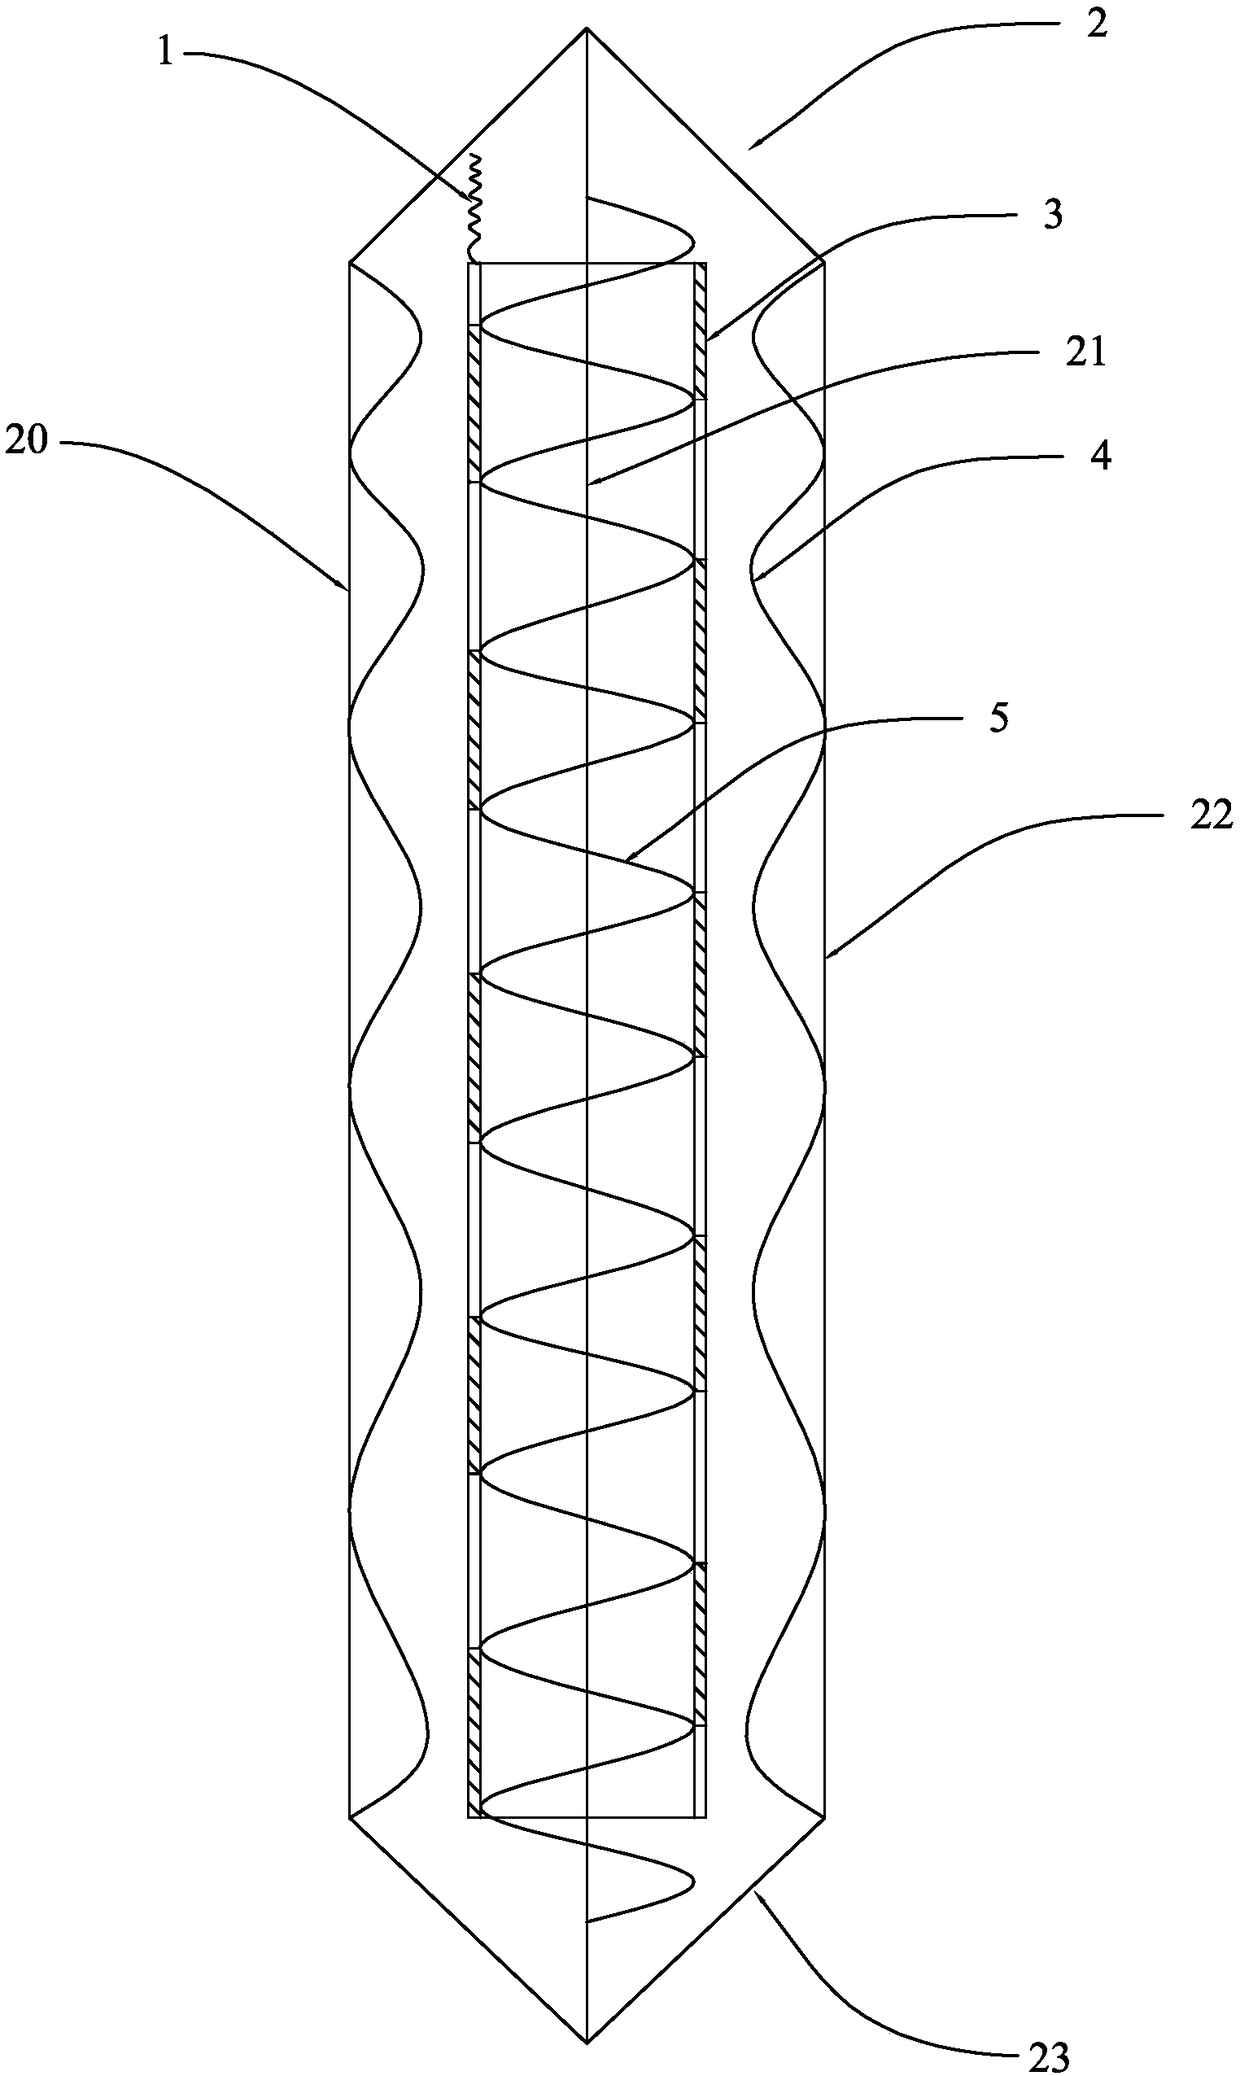 Surface polishing technology of magnesium alloy intravascular stent and assisting mechanism